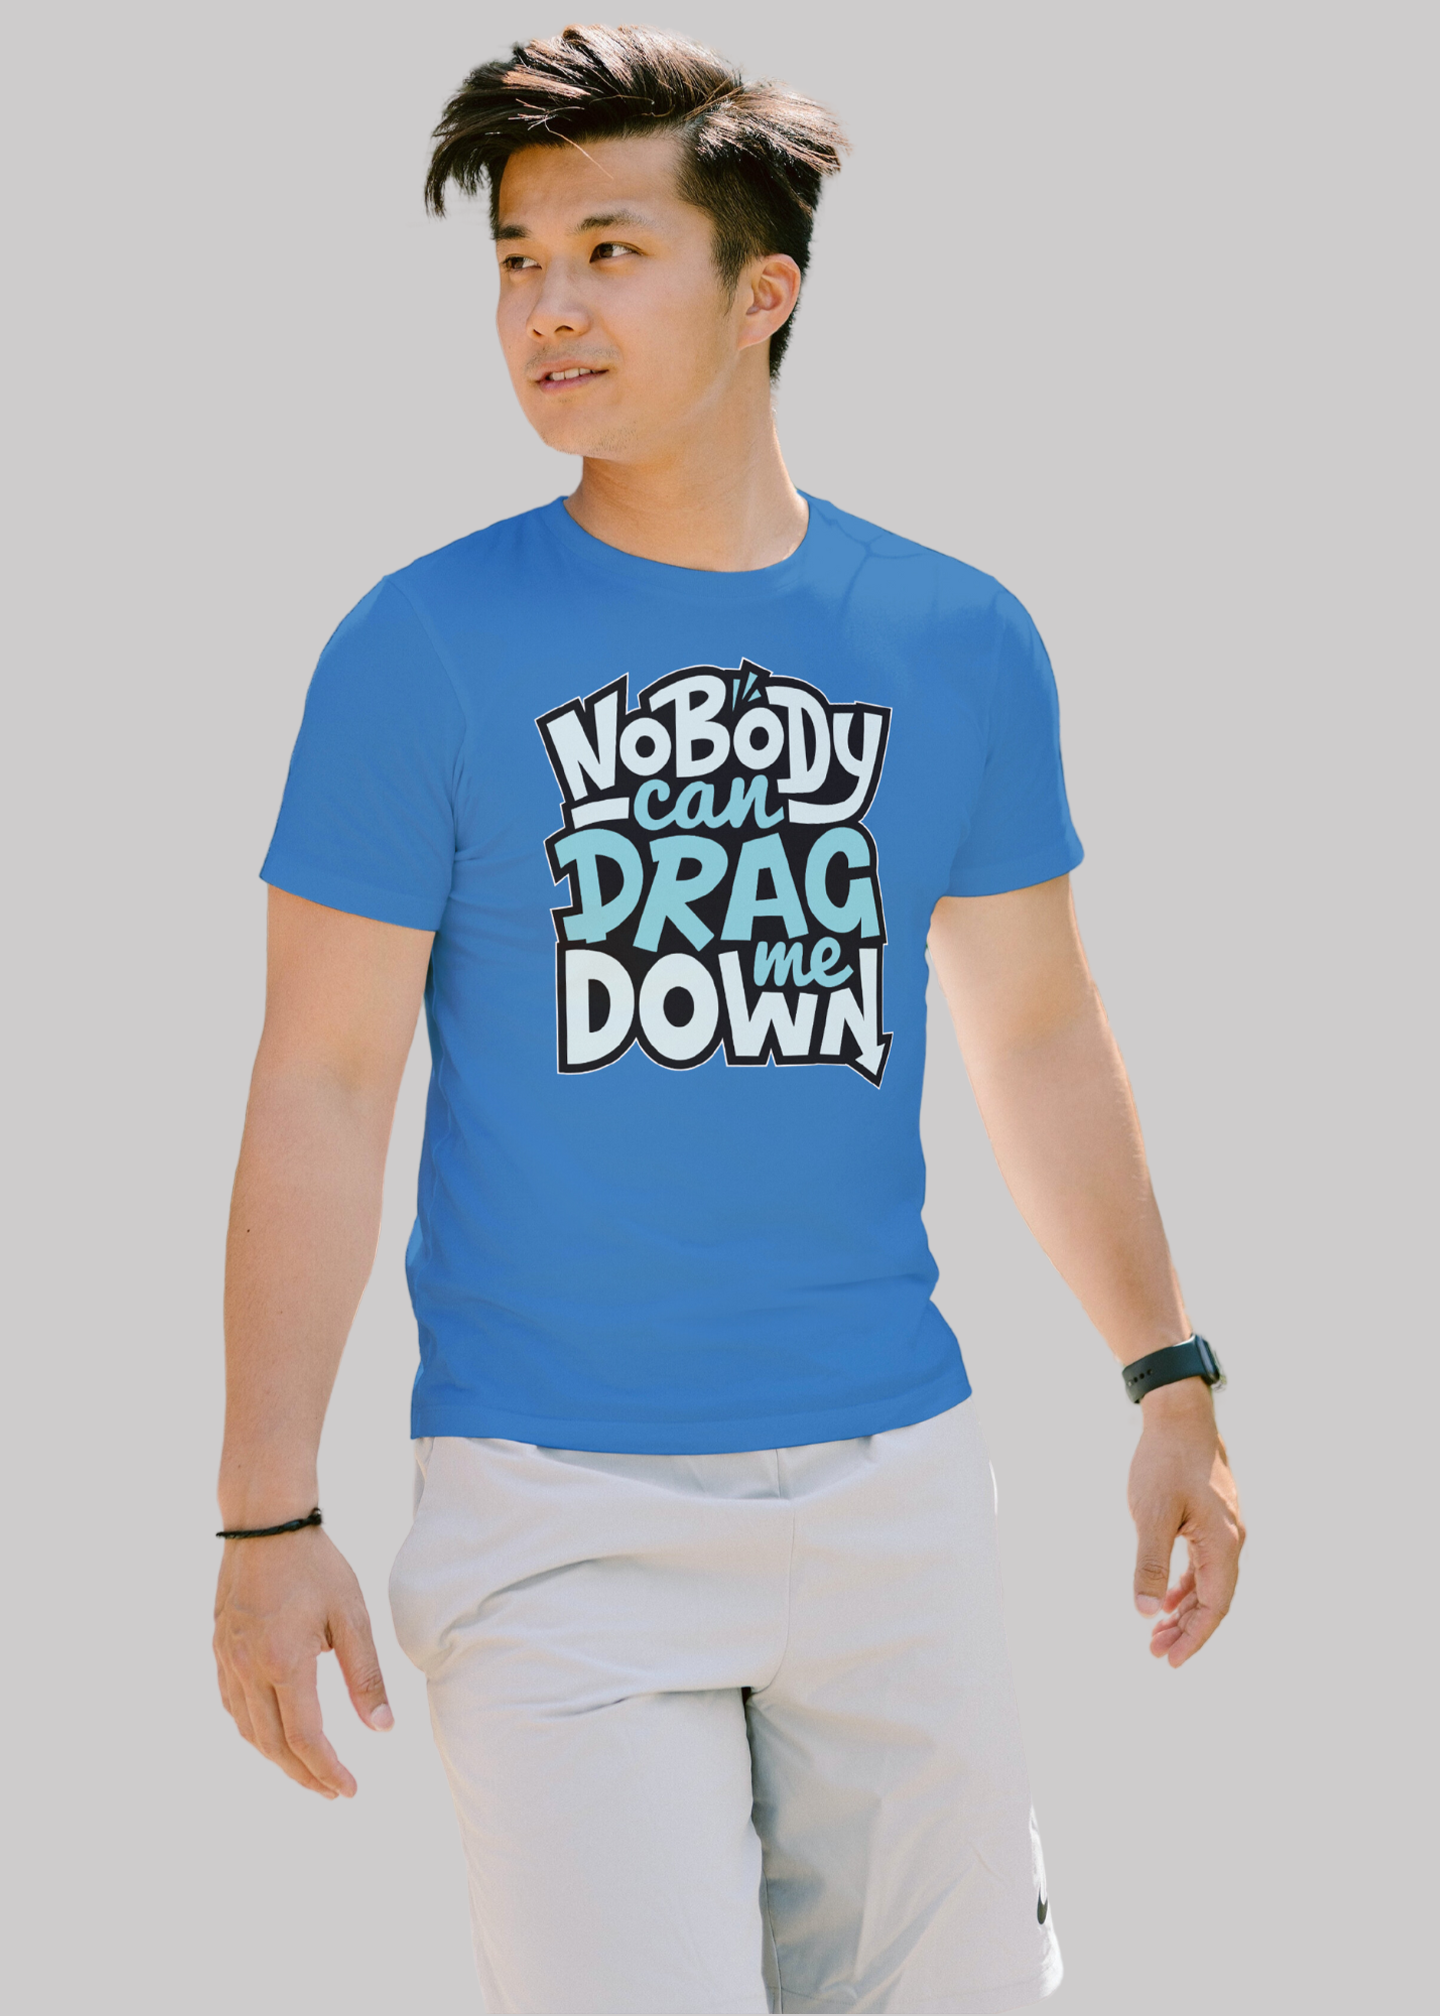 Nobody can drag me down Printed Half Sleeve Premium Cotton T-shirt For Men